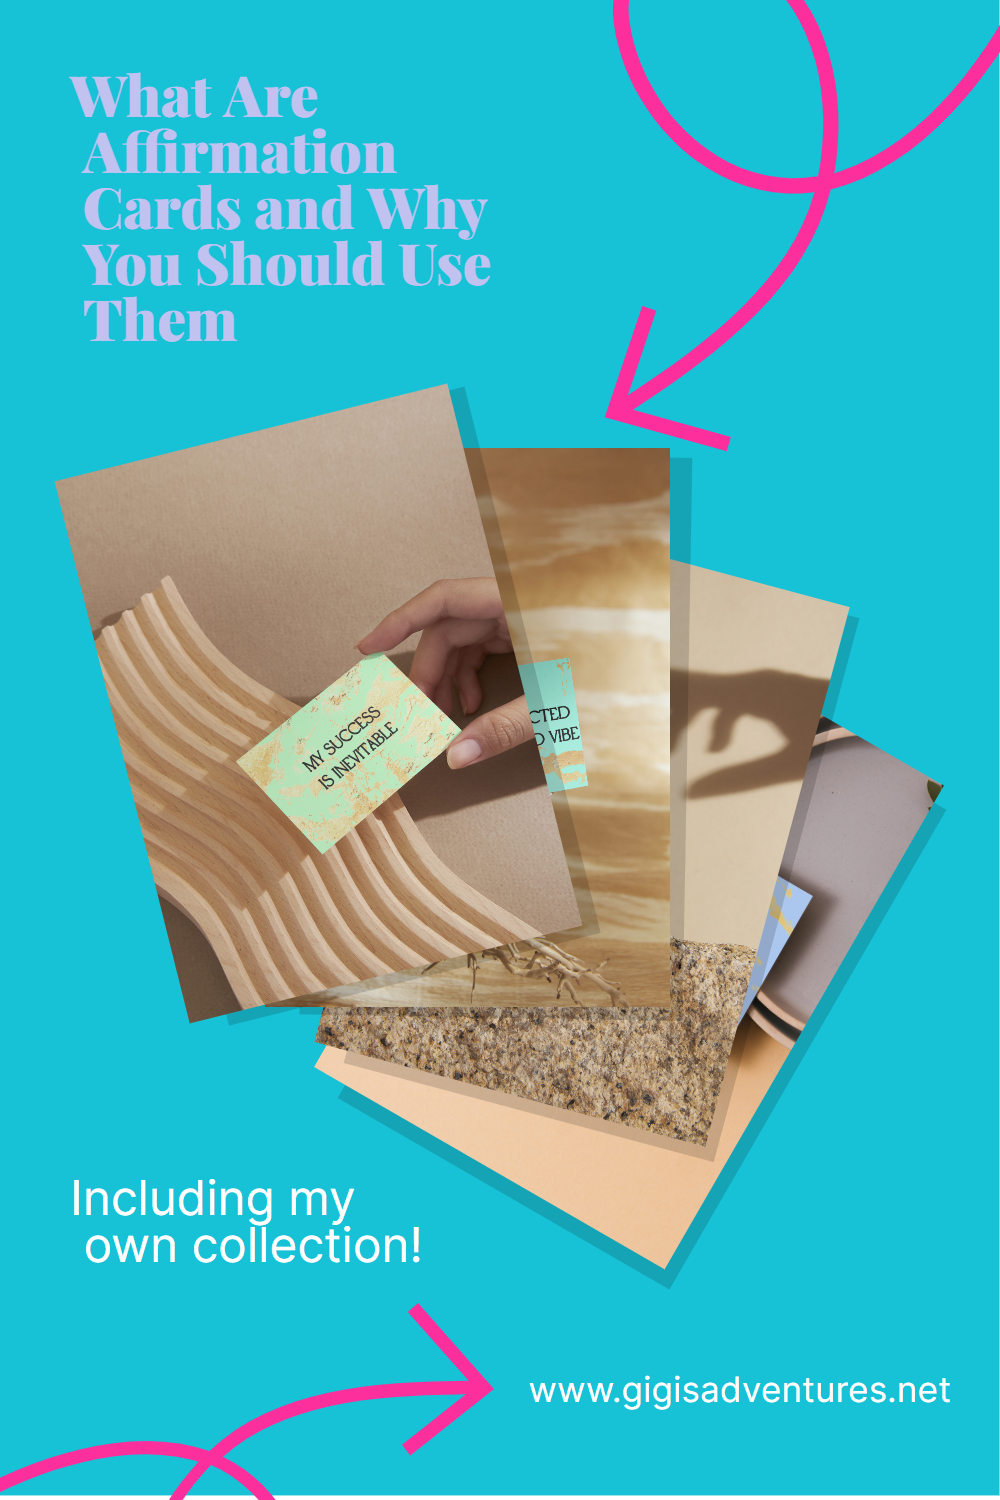 What Are Affirmation Cards and Why You Should Use Them